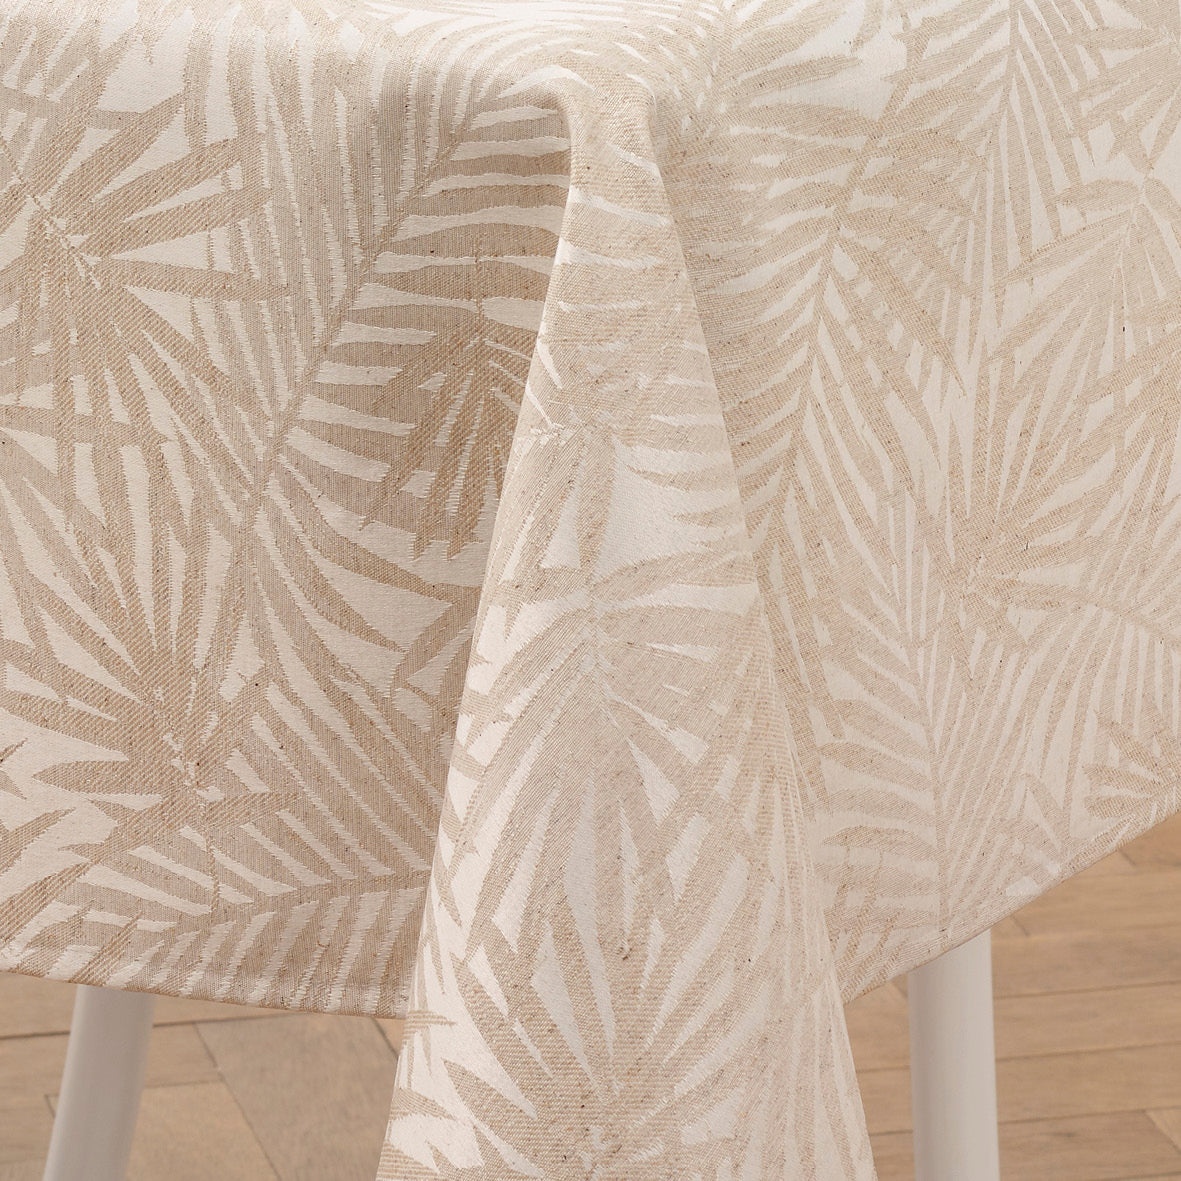 Tablecloth - Palmier Taupe